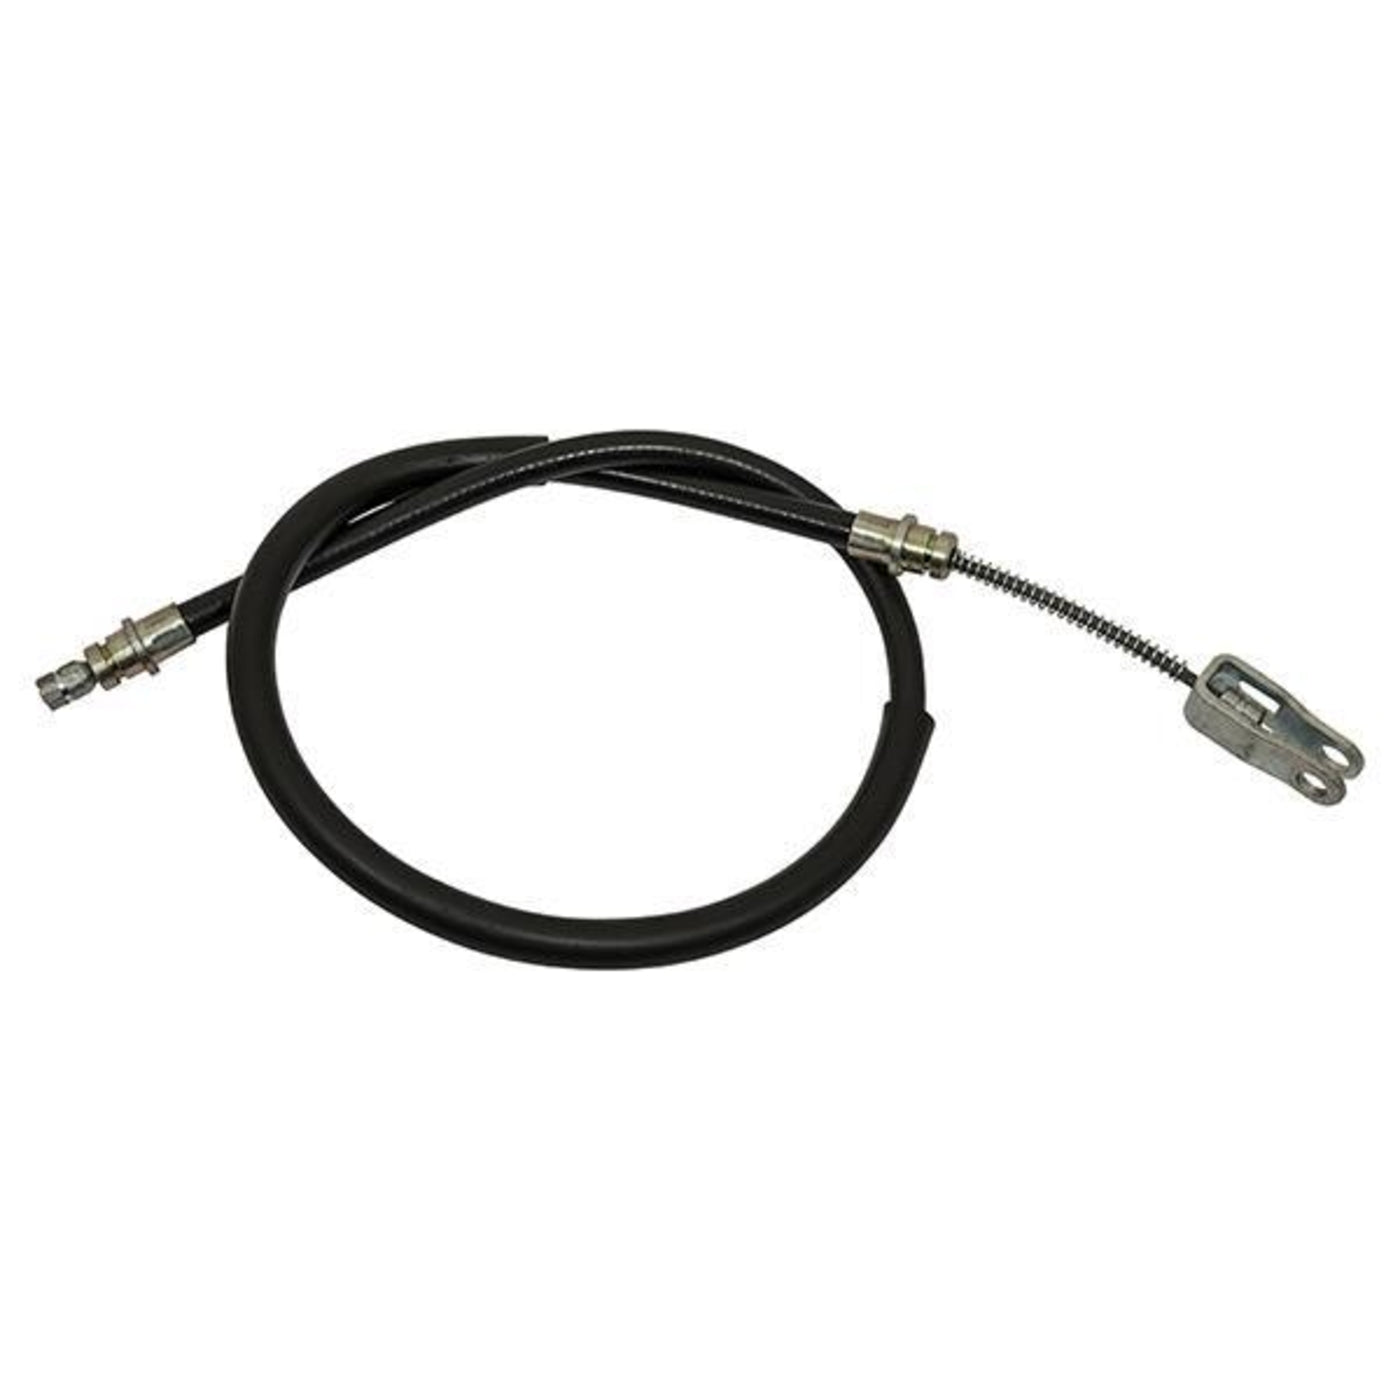 Driver - E-Z-GO Gas 4-Cycle Brake Cable (Years 1993-1994)